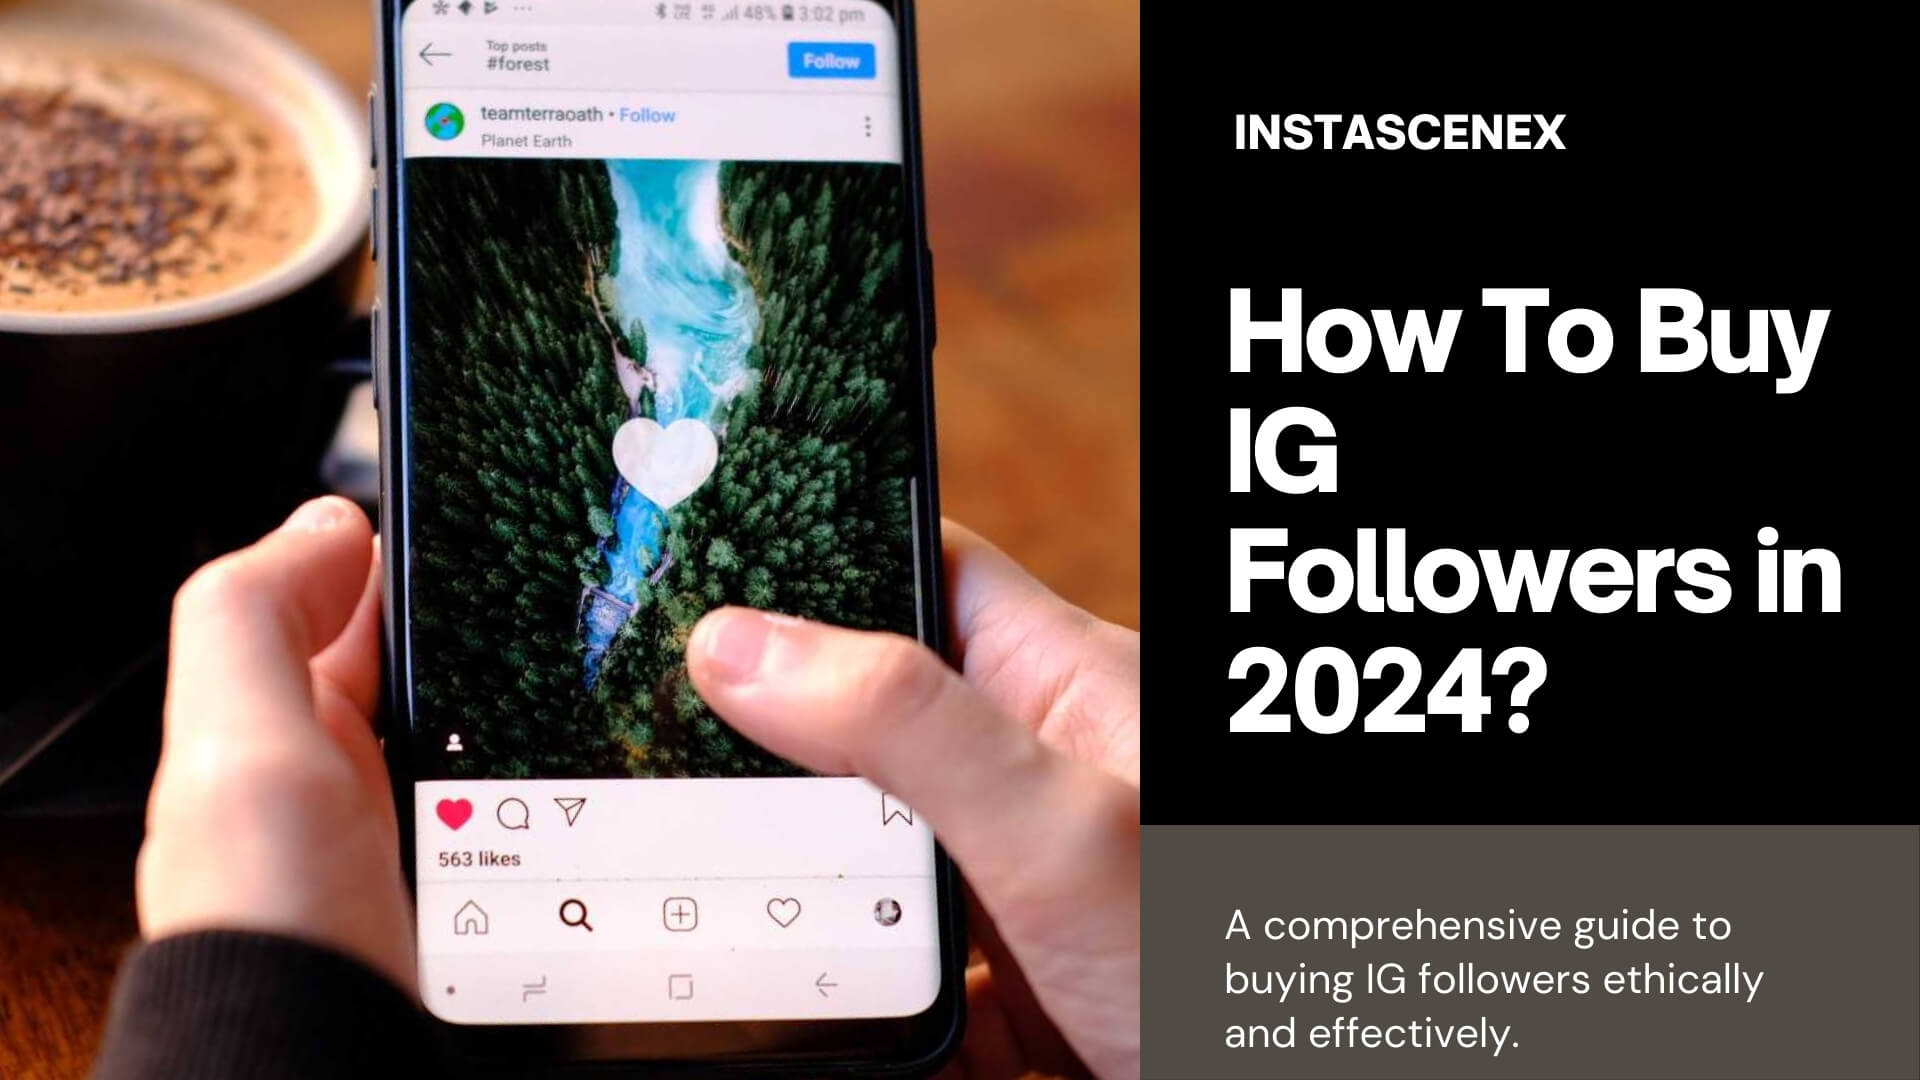 How To Buy IG Followers in 2024? Best Guide